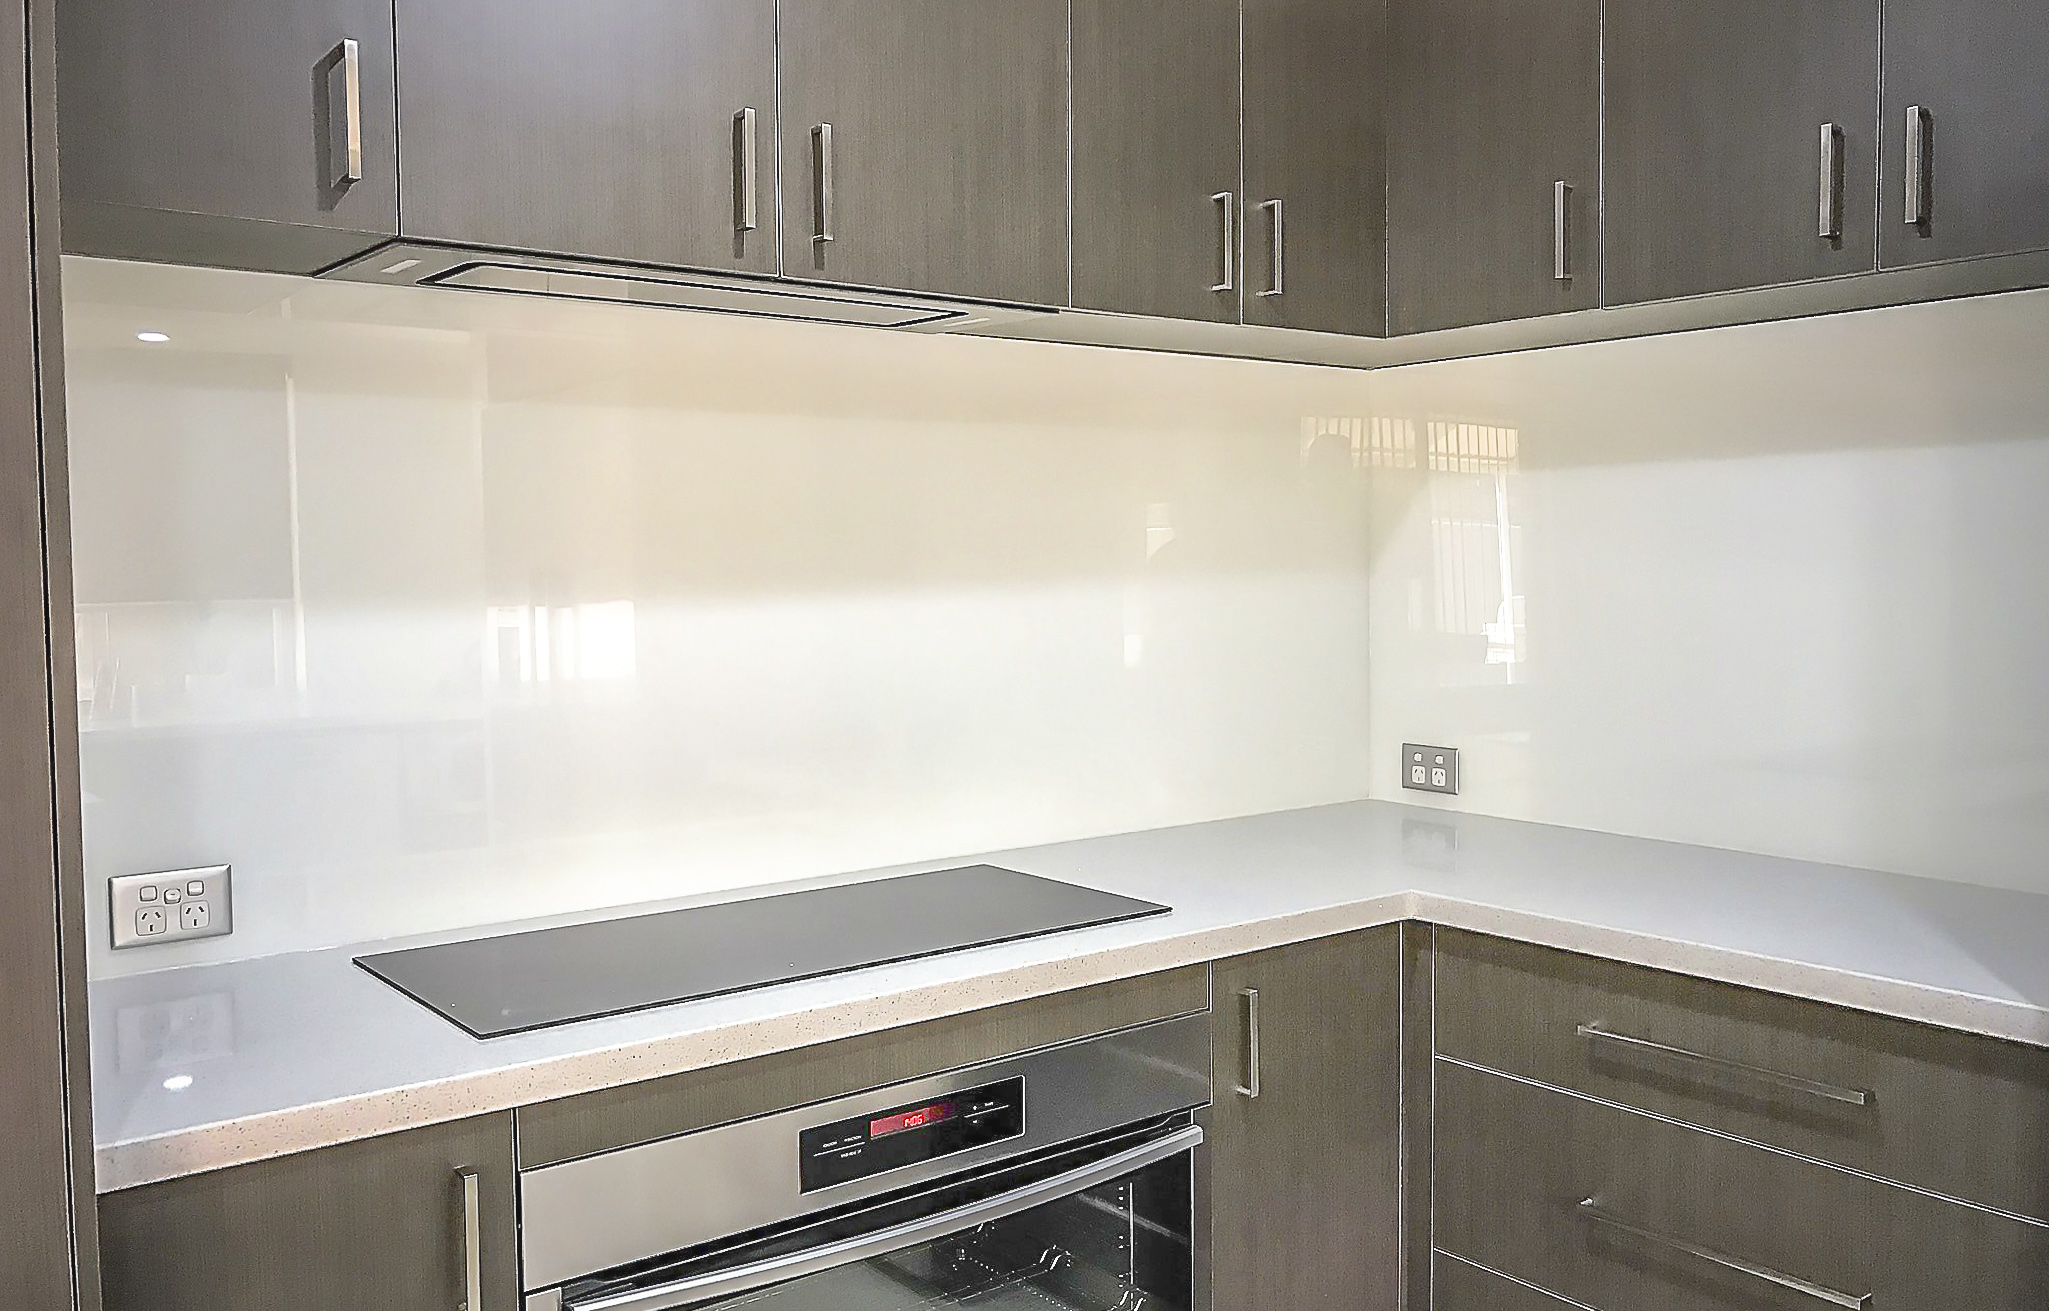 How To Remove A Glass Splashback Easily And Safely